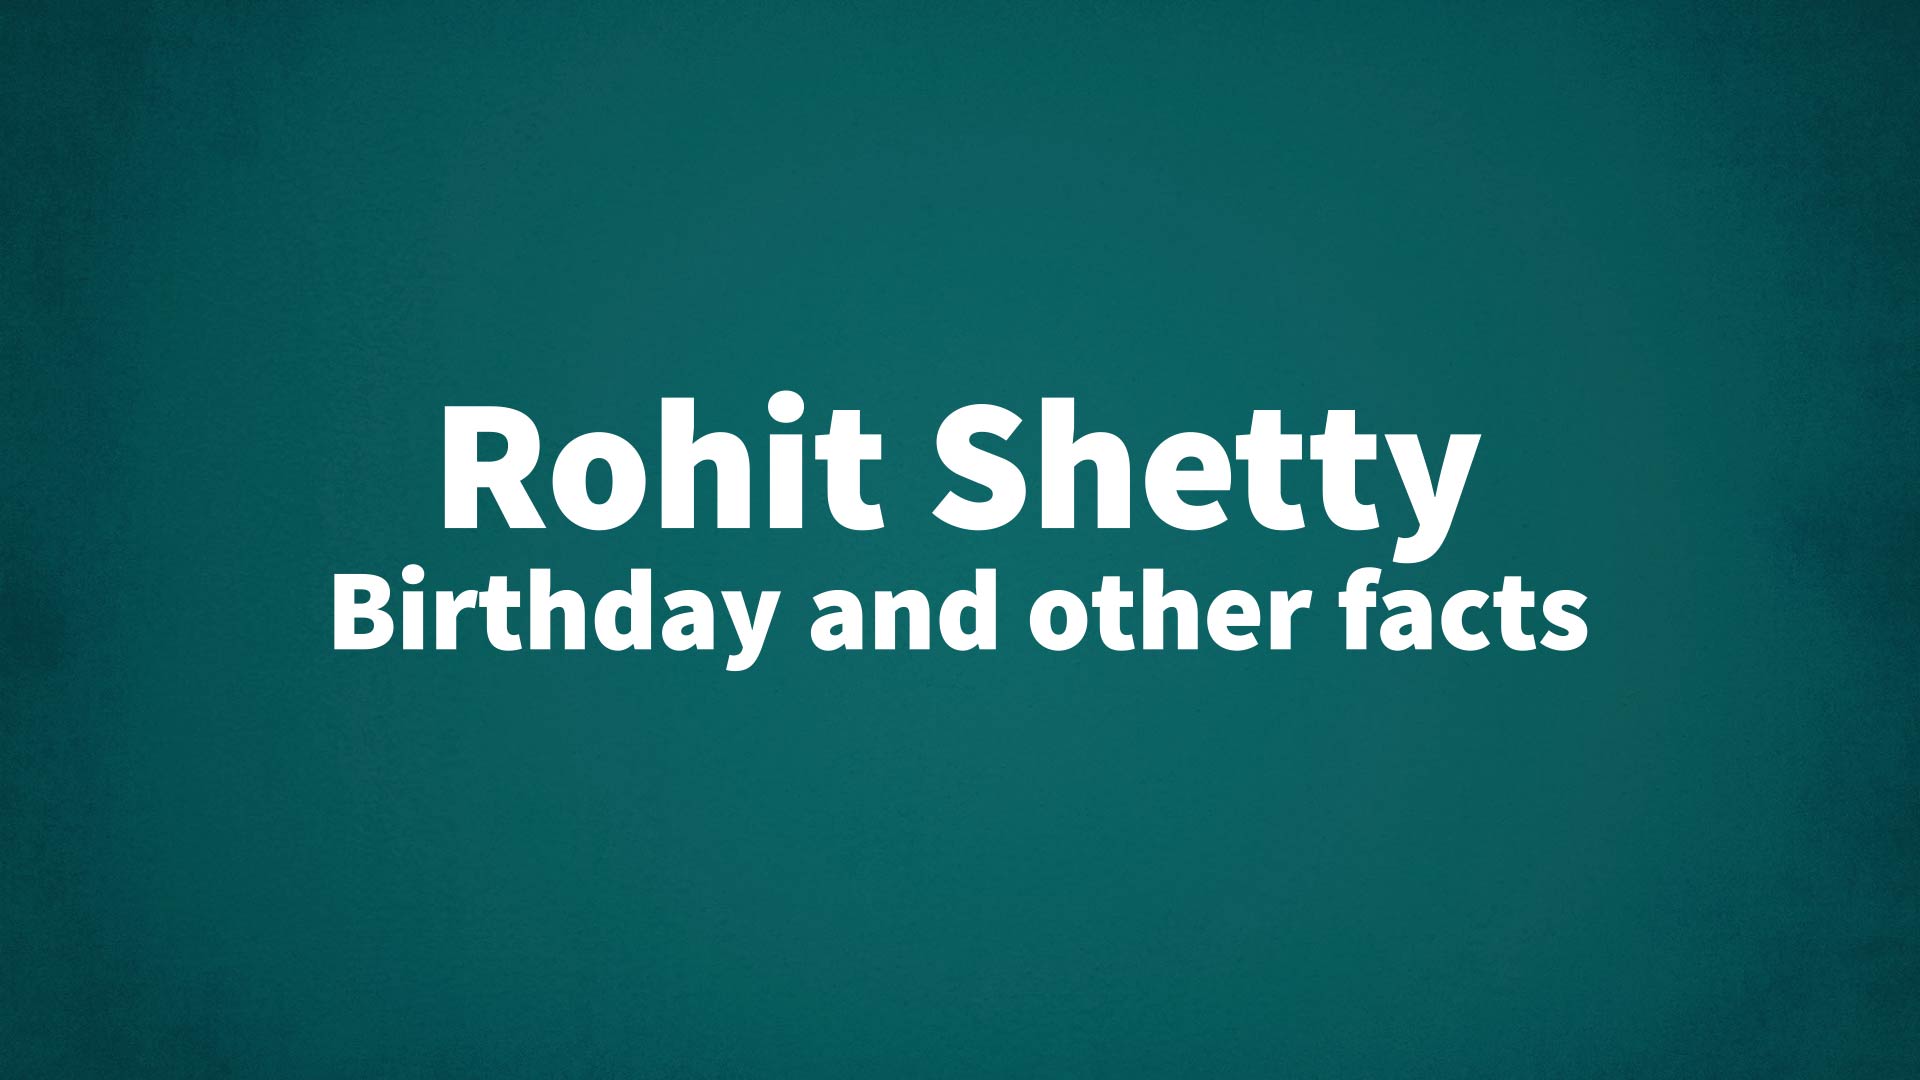 title image for Rohit Shetty birthday